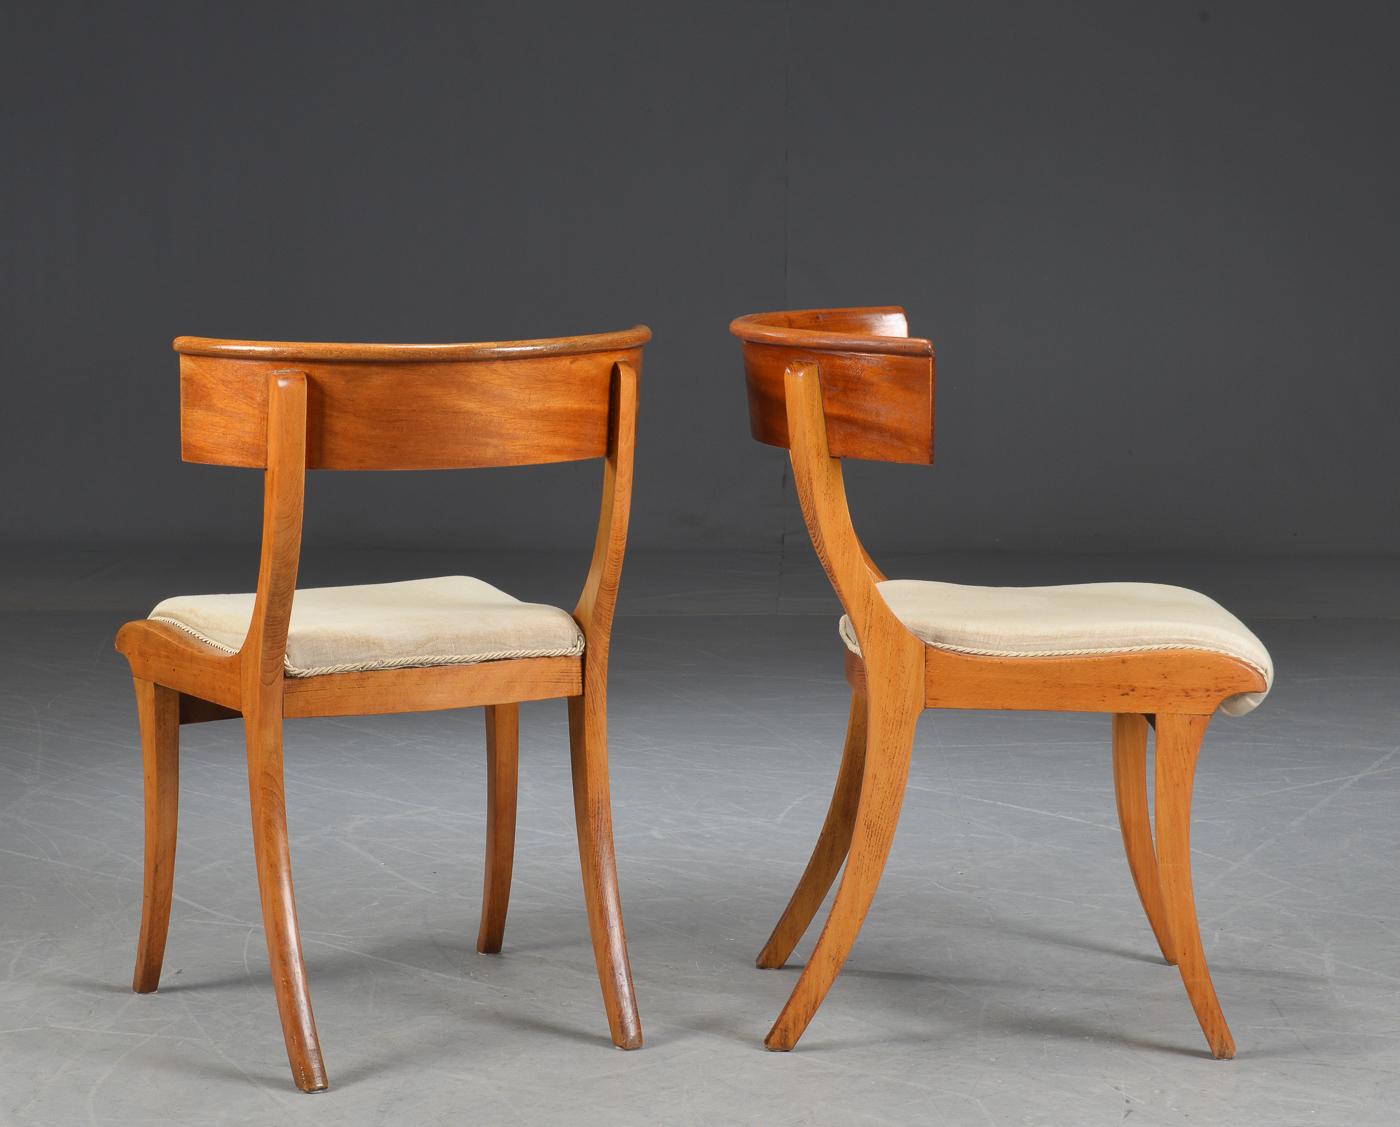 Neoclassical Revival Pair of Klismo Chairs